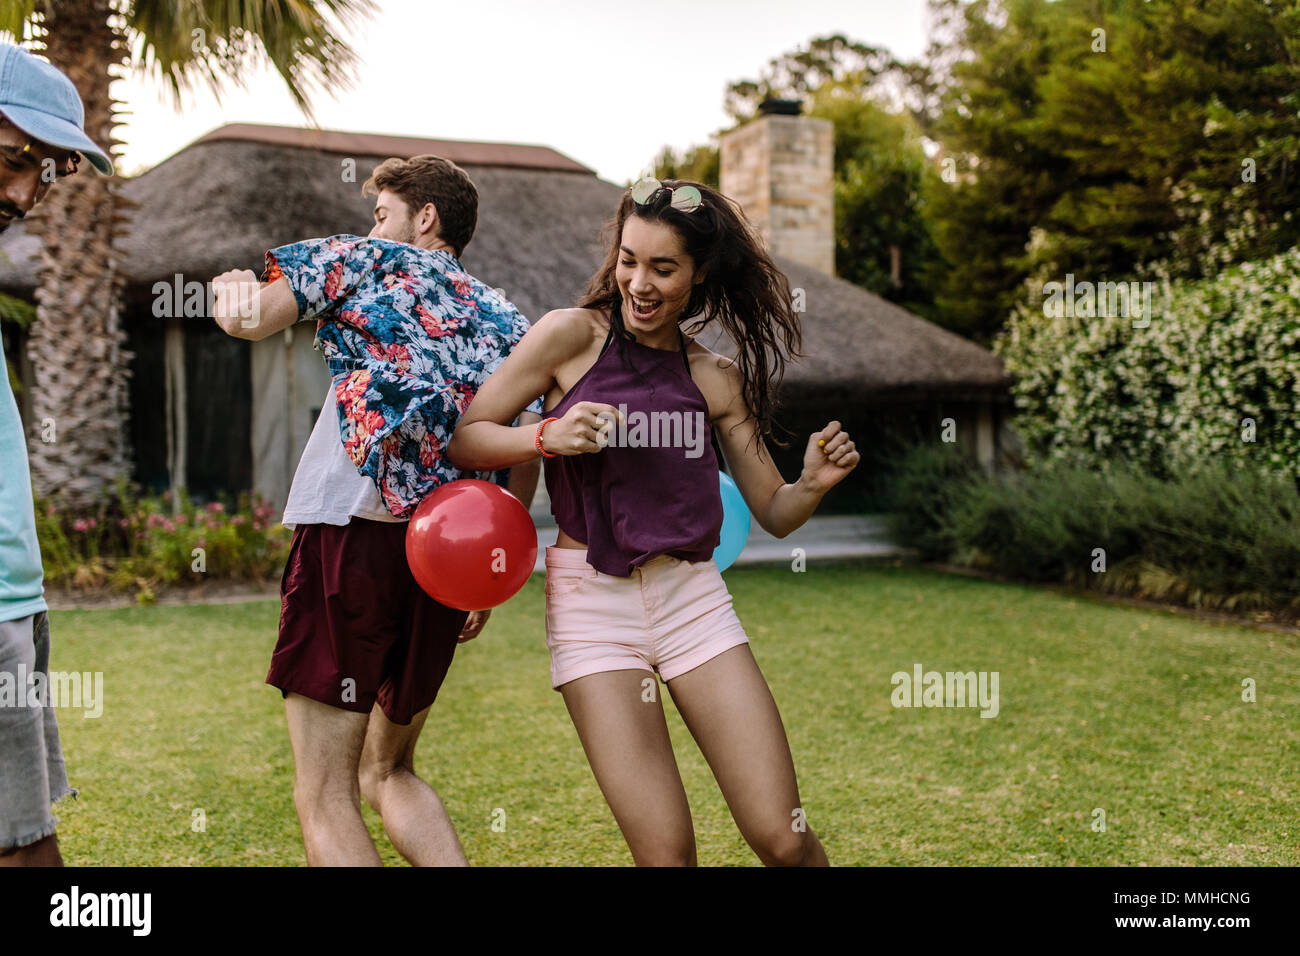 Woman trying to pop a balloon with her hips tied on man's back. Friends playing balloon popping games at party outdoors. Stock Photo